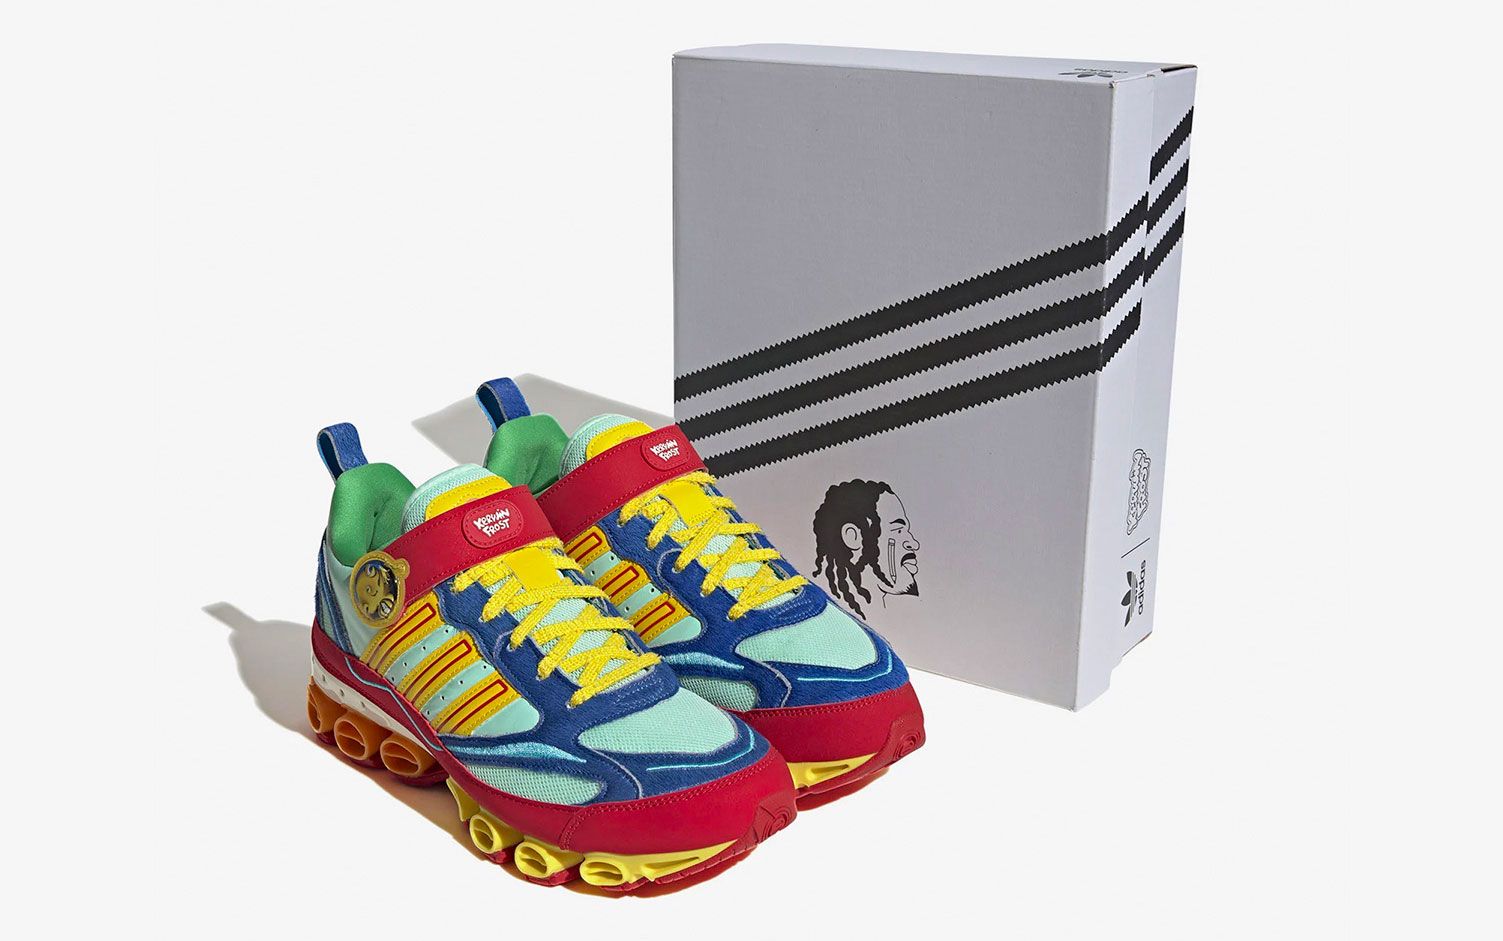 Kerwin Frost x adidas Microbounce T1 product image of a pair of multi-coloured low-top sneakers.